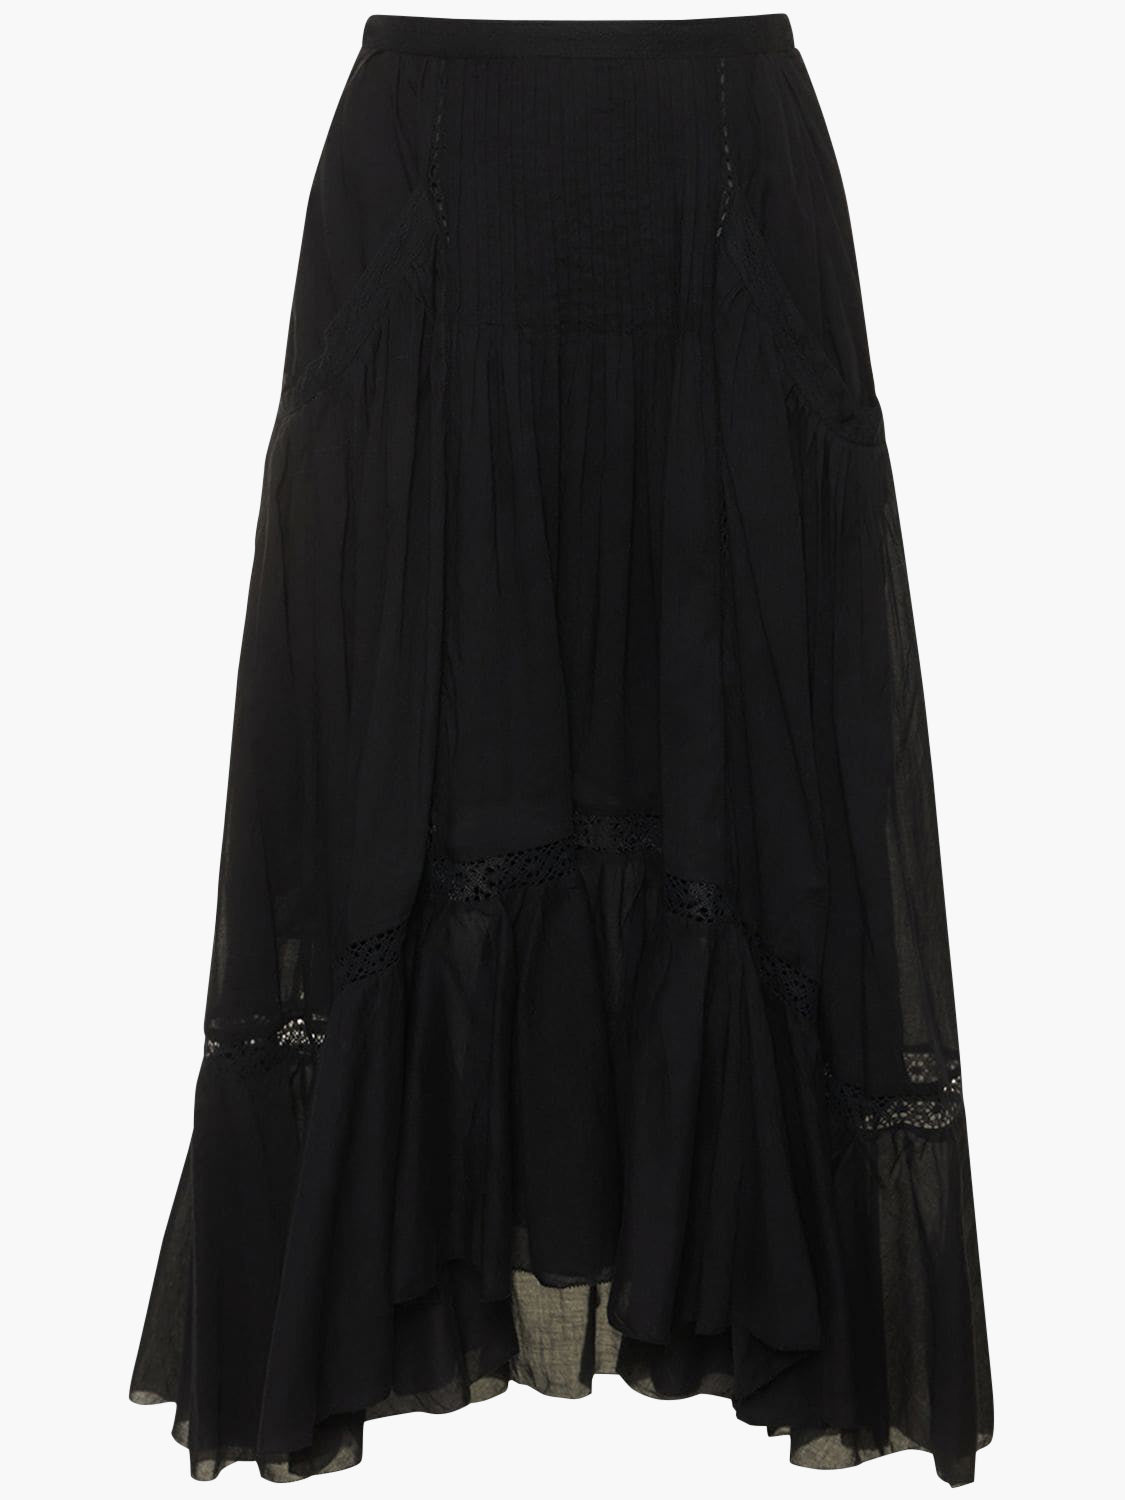 Isabel Marant Mugiana Skirt in Black available at TNT The New Trend Australia. Free shipping on orders over $300 AUD.